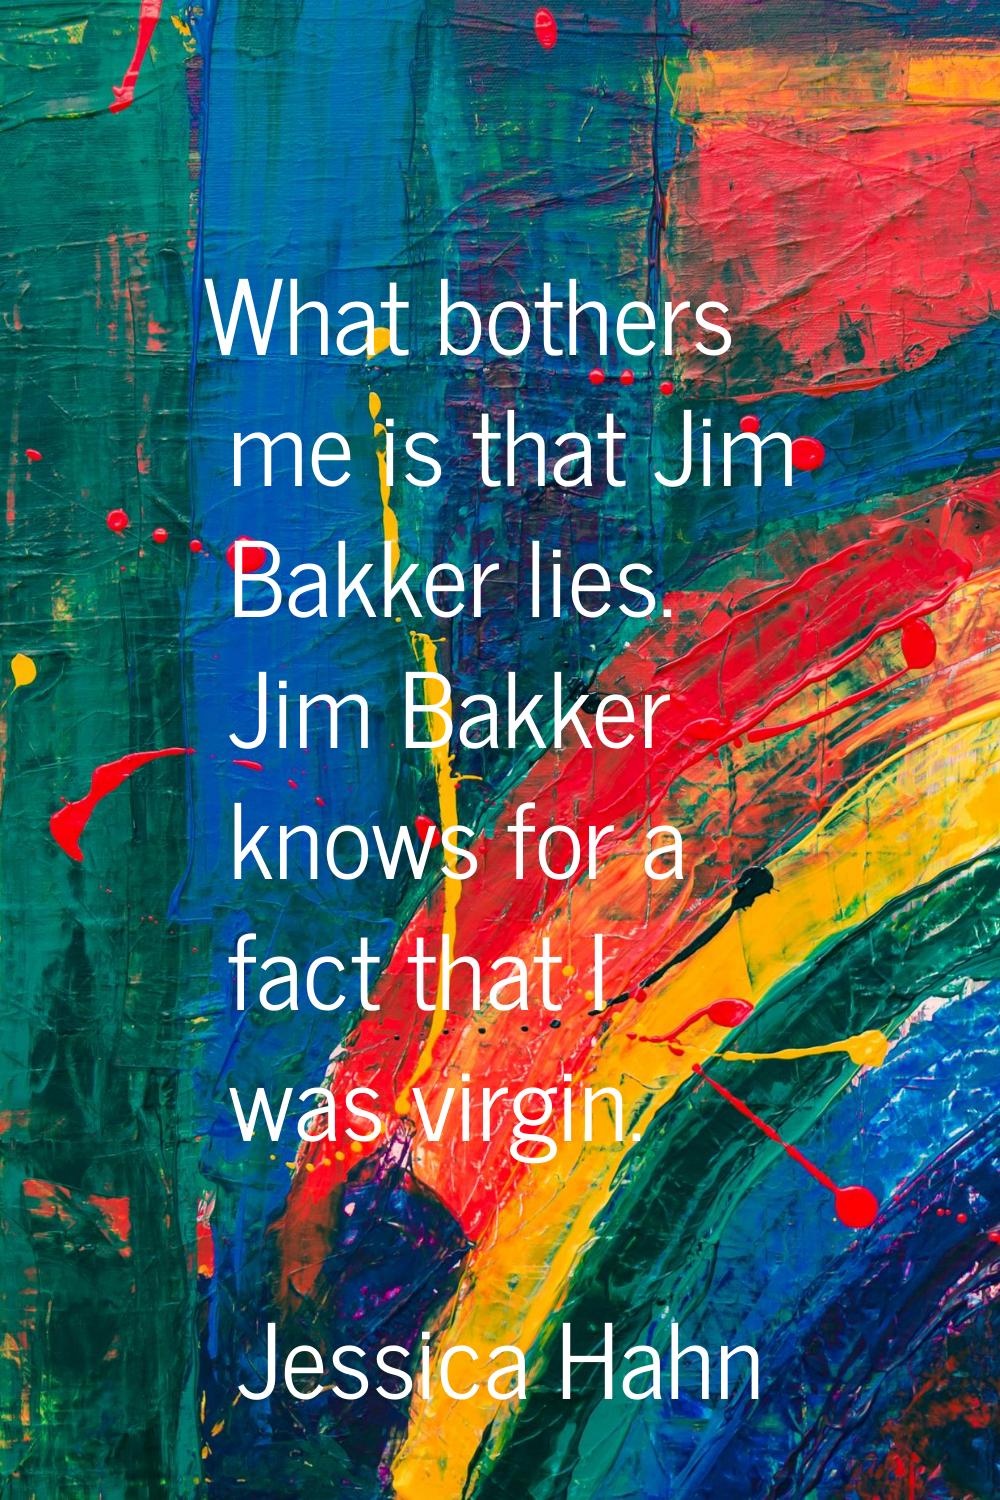 What bothers me is that Jim Bakker lies. Jim Bakker knows for a fact that I was virgin.